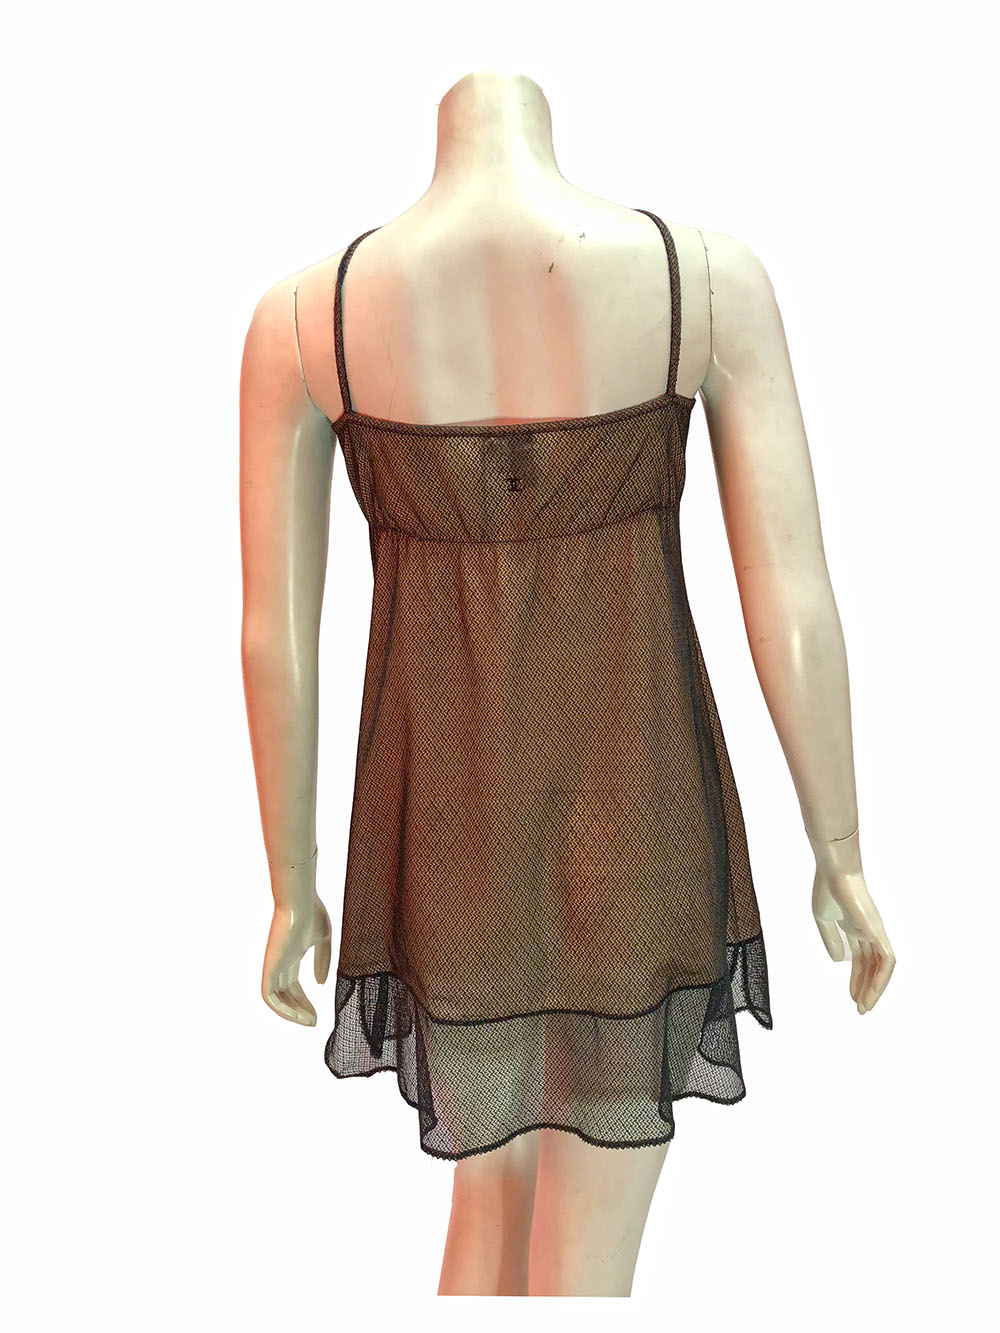 Chanel Nude Slip Dress With Mesh Overlay — Entre Nous Showroom